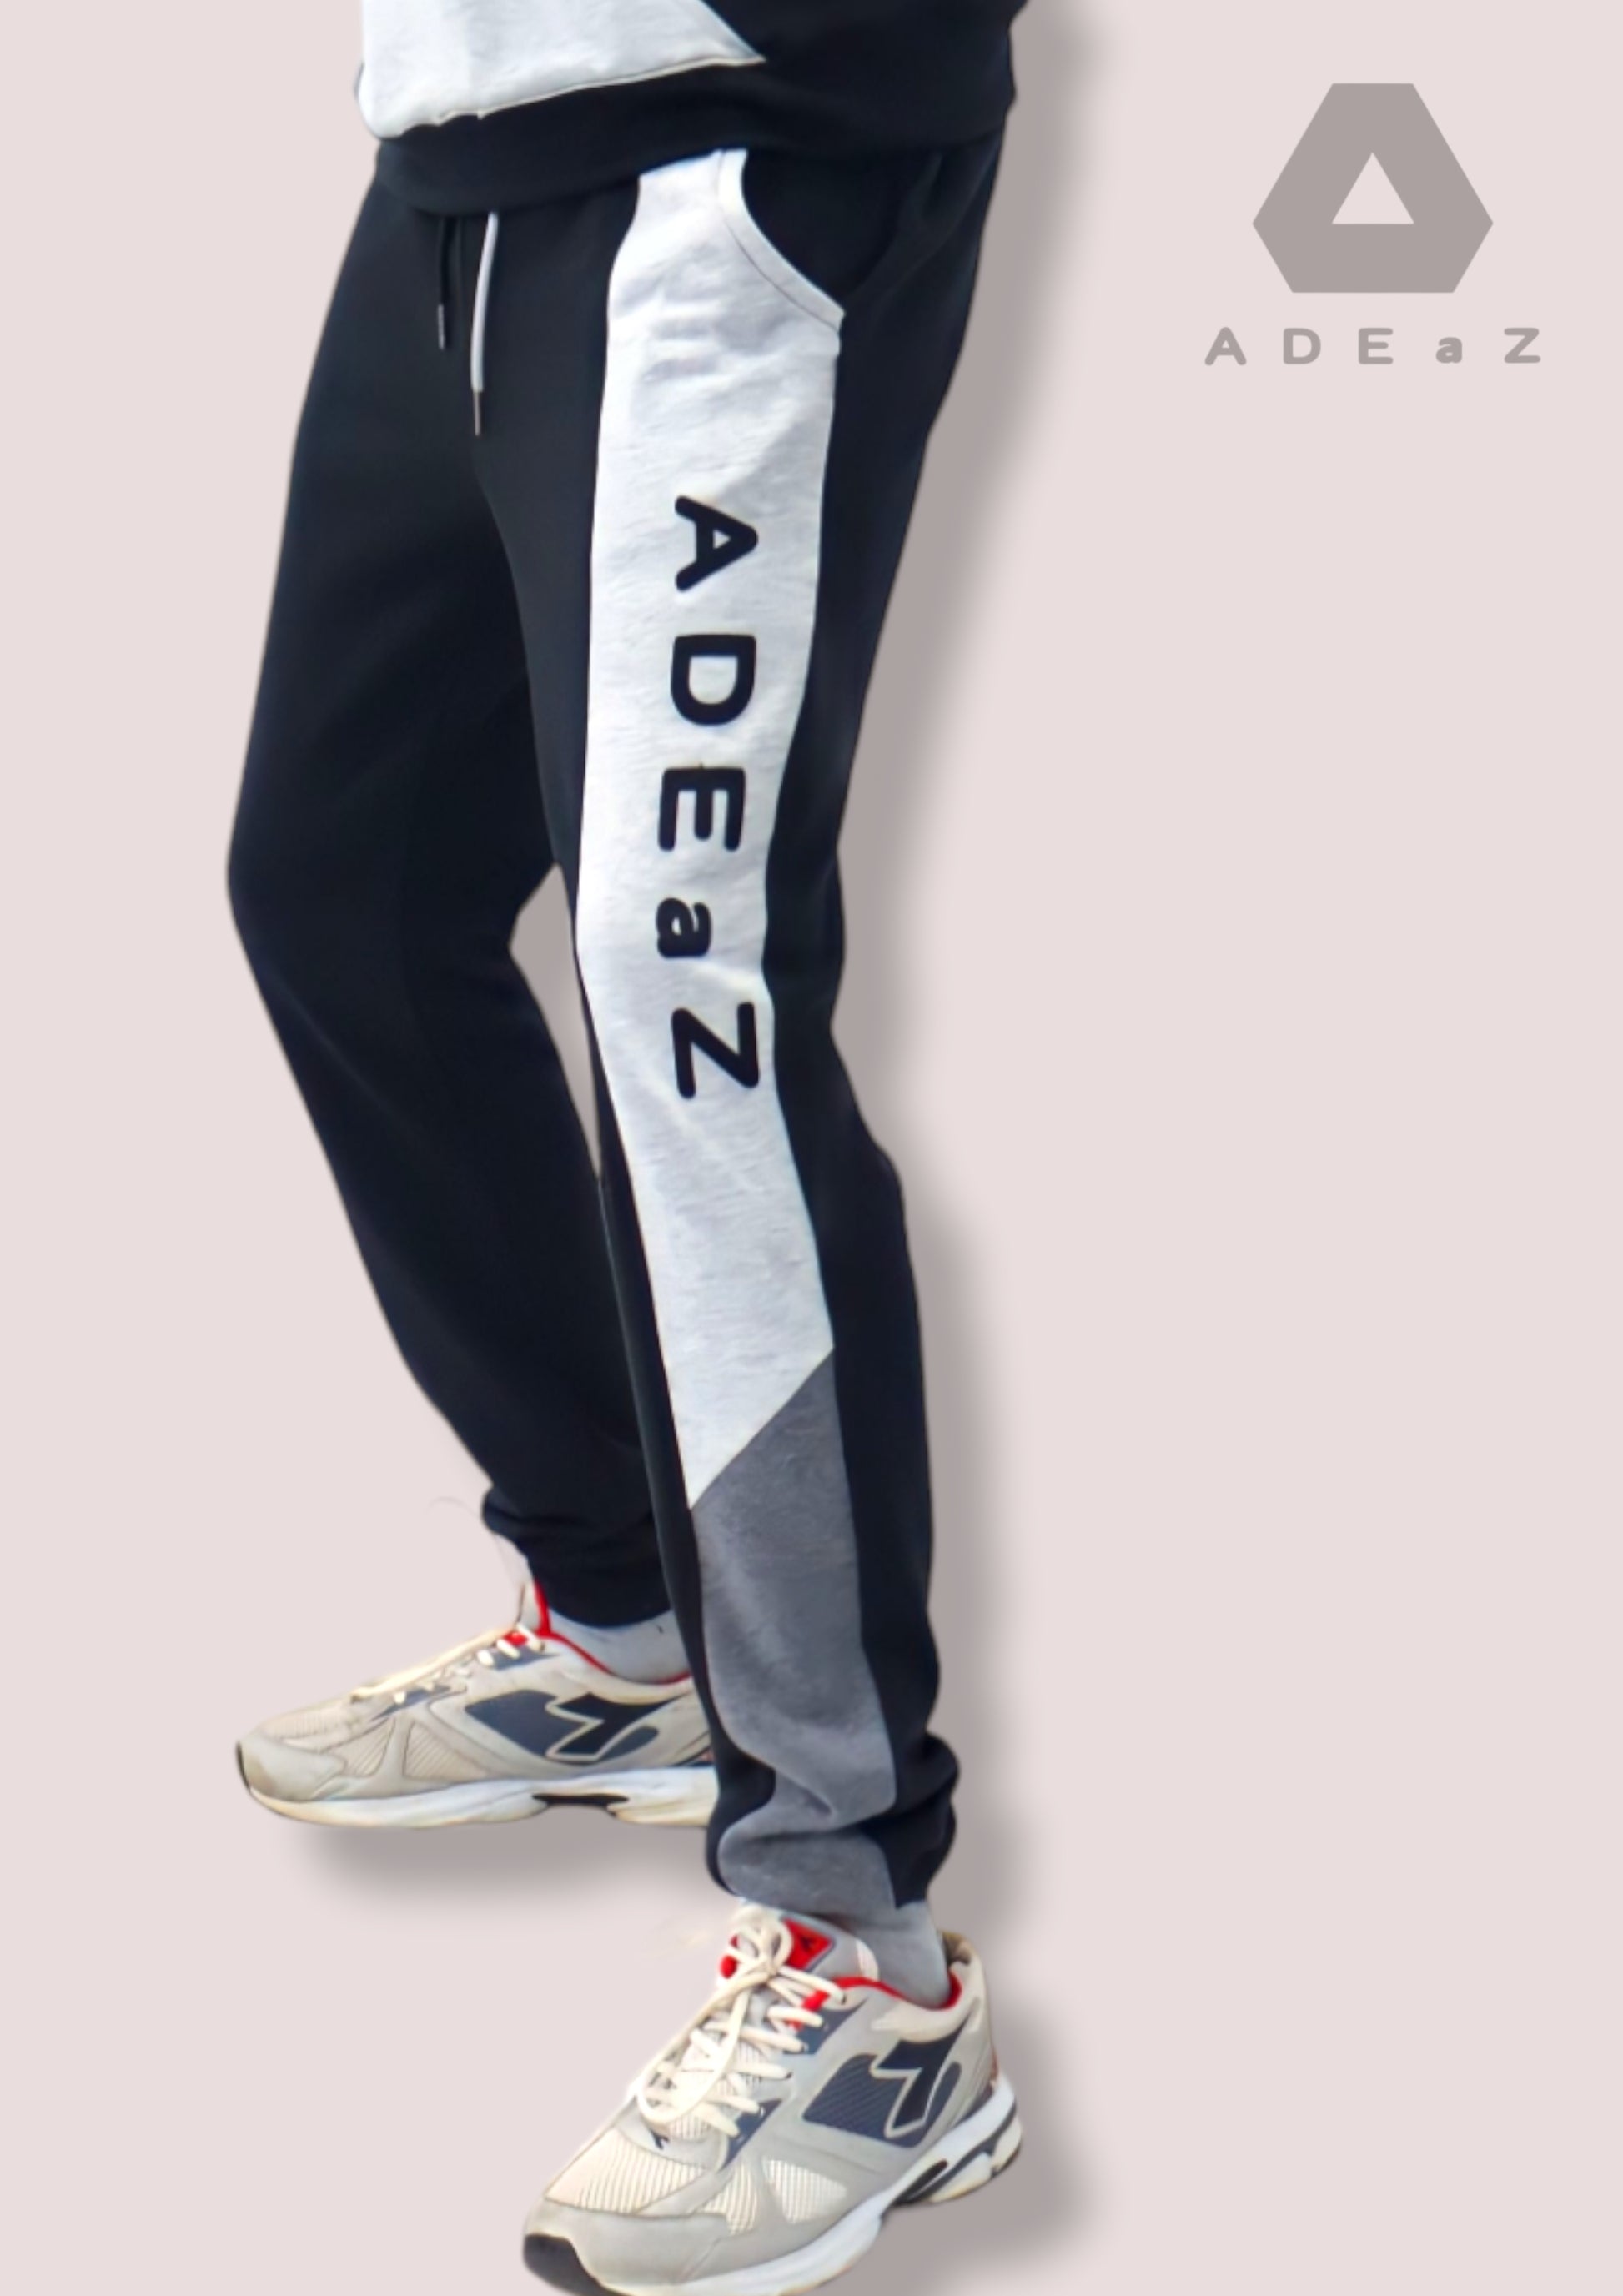 Men's jogging bottoms in black, providing relaxed and versatile comfort for active or casual wear.